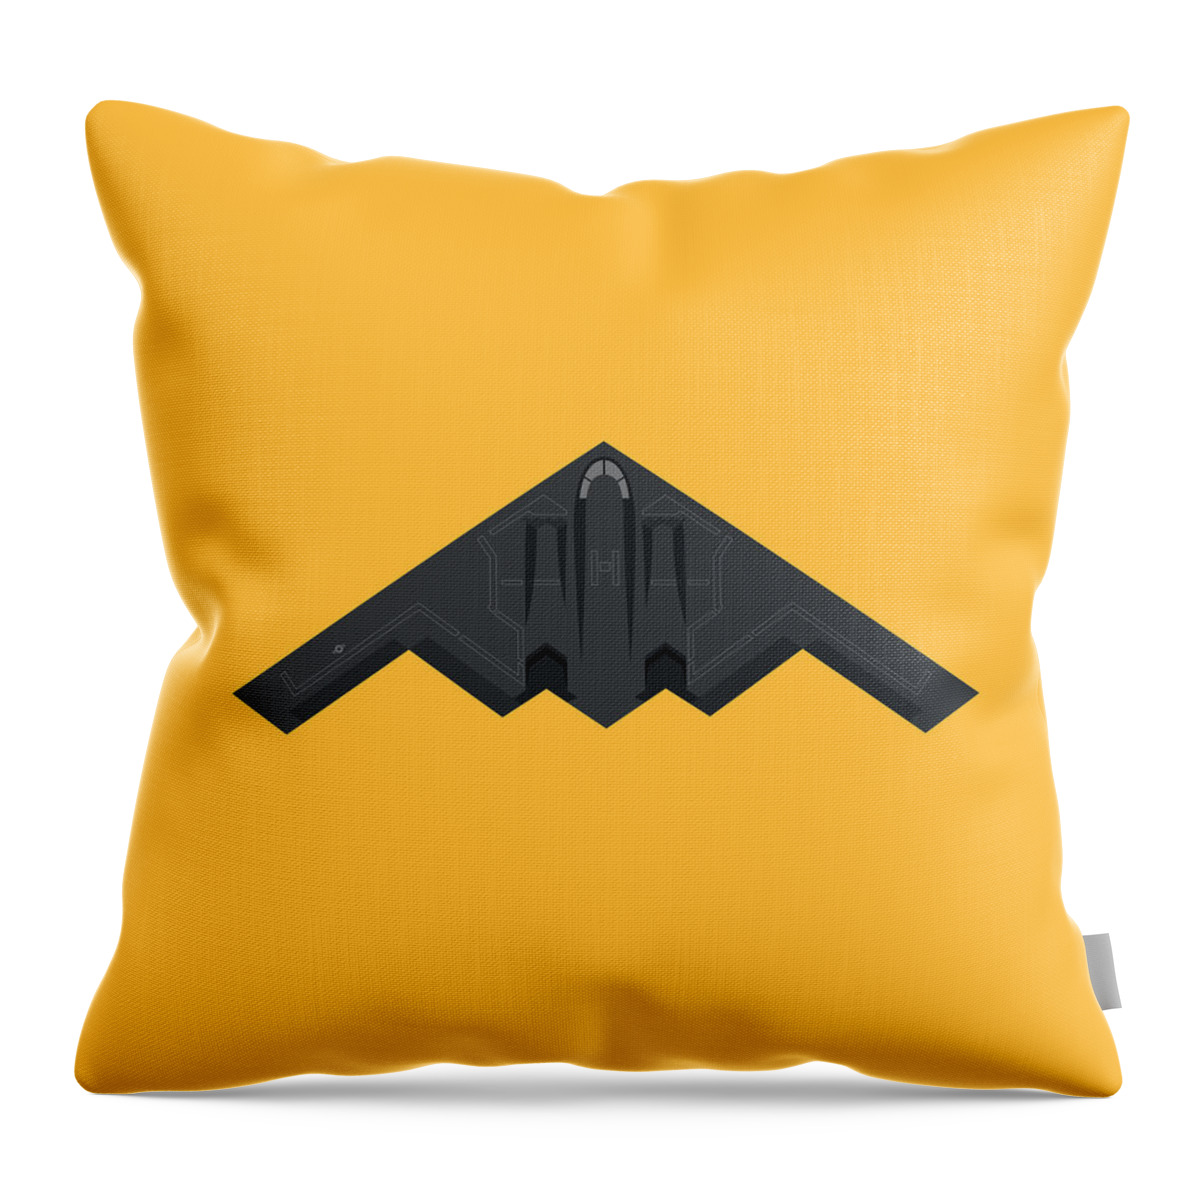 Aviation Throw Pillow featuring the digital art B2 Stealth Bomber Jet Aircraft - Yellow by Organic Synthesis